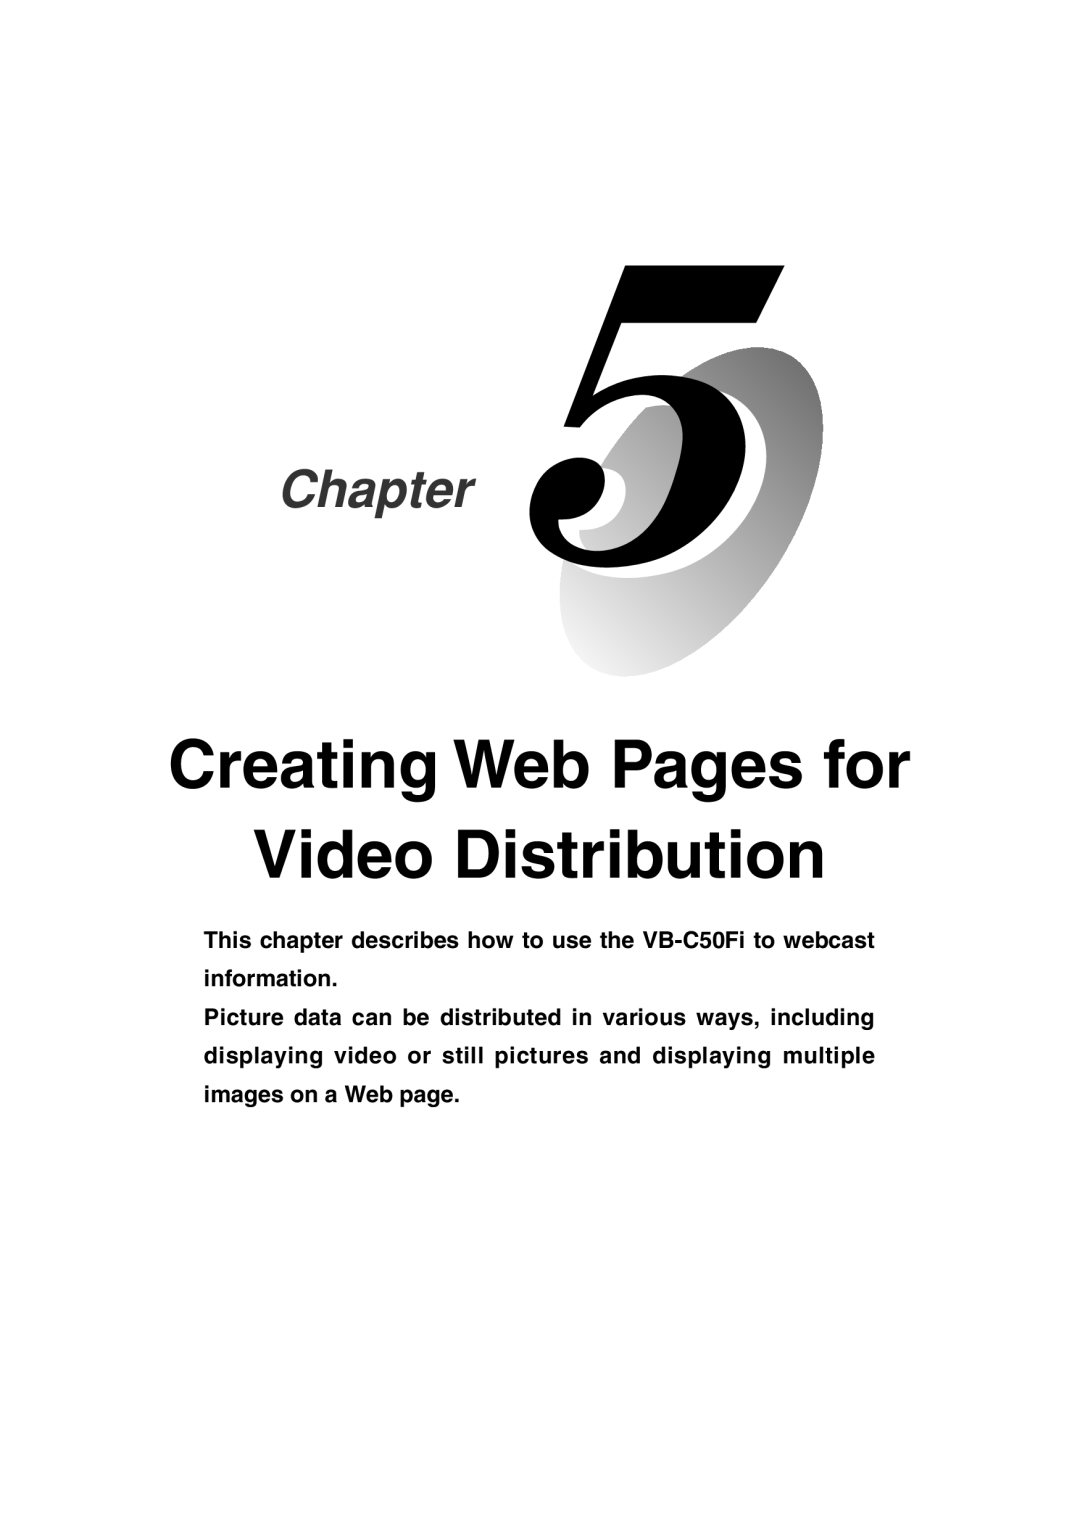 Canon Vb-C50fi user manual Creating Web Pages for Video Distribution, Chapter 